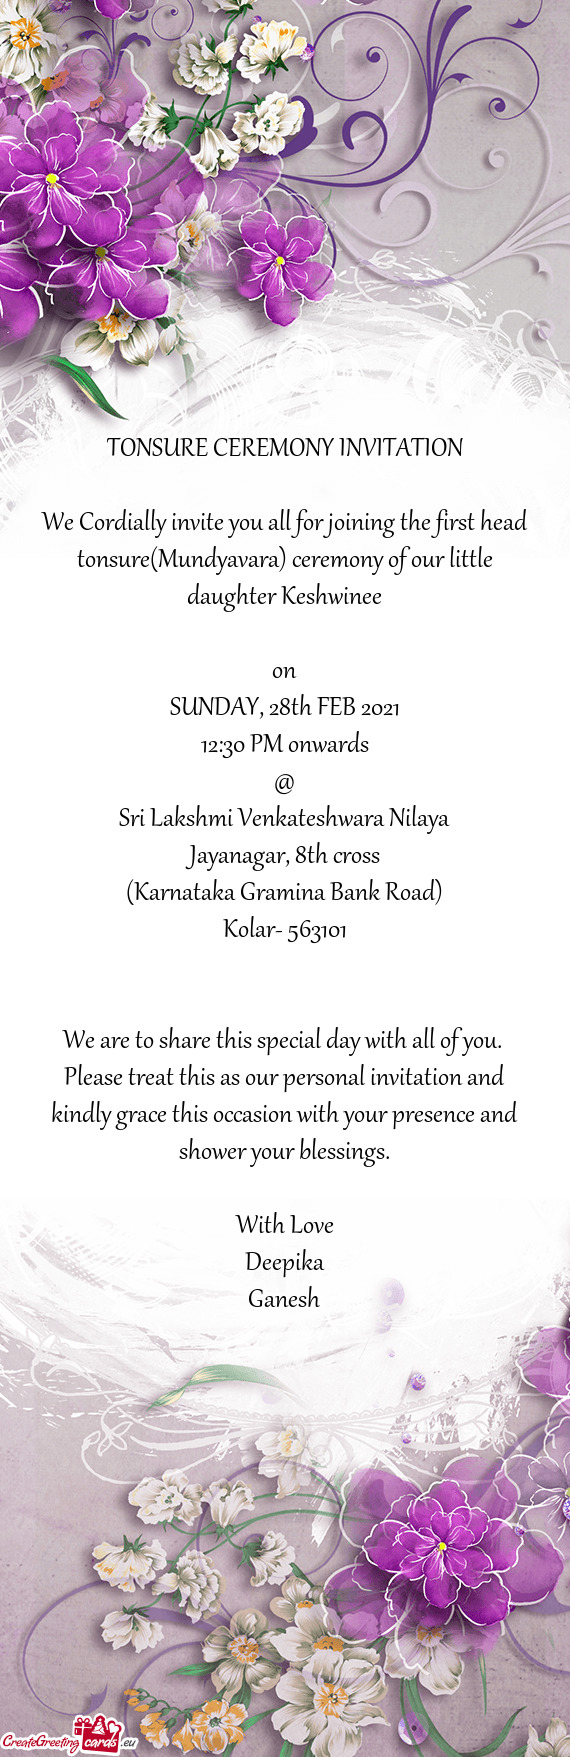 We Cordially invite you all for joining the first head tonsure(Mundyavara) ceremony of our little da